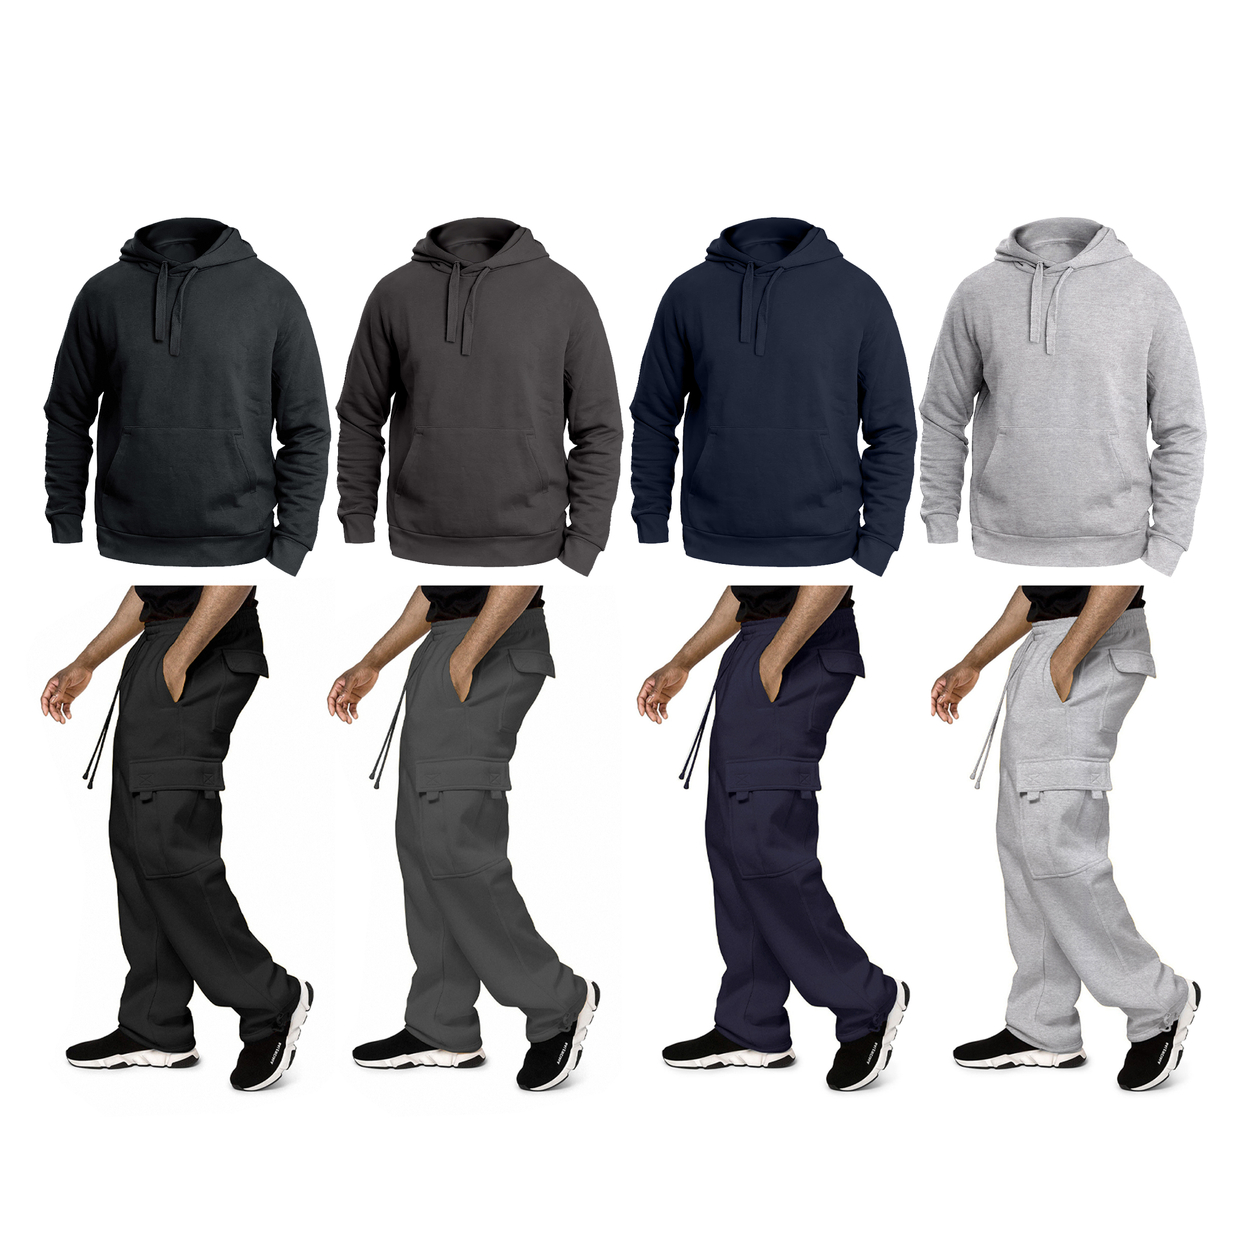 Multi-Pack: Big & Tall Men's Winter Warm Cozy Athletic Fleece Lined Multi-Pocket Cargo Sweatsuit - Charcoal, 2-pack, Xx-large